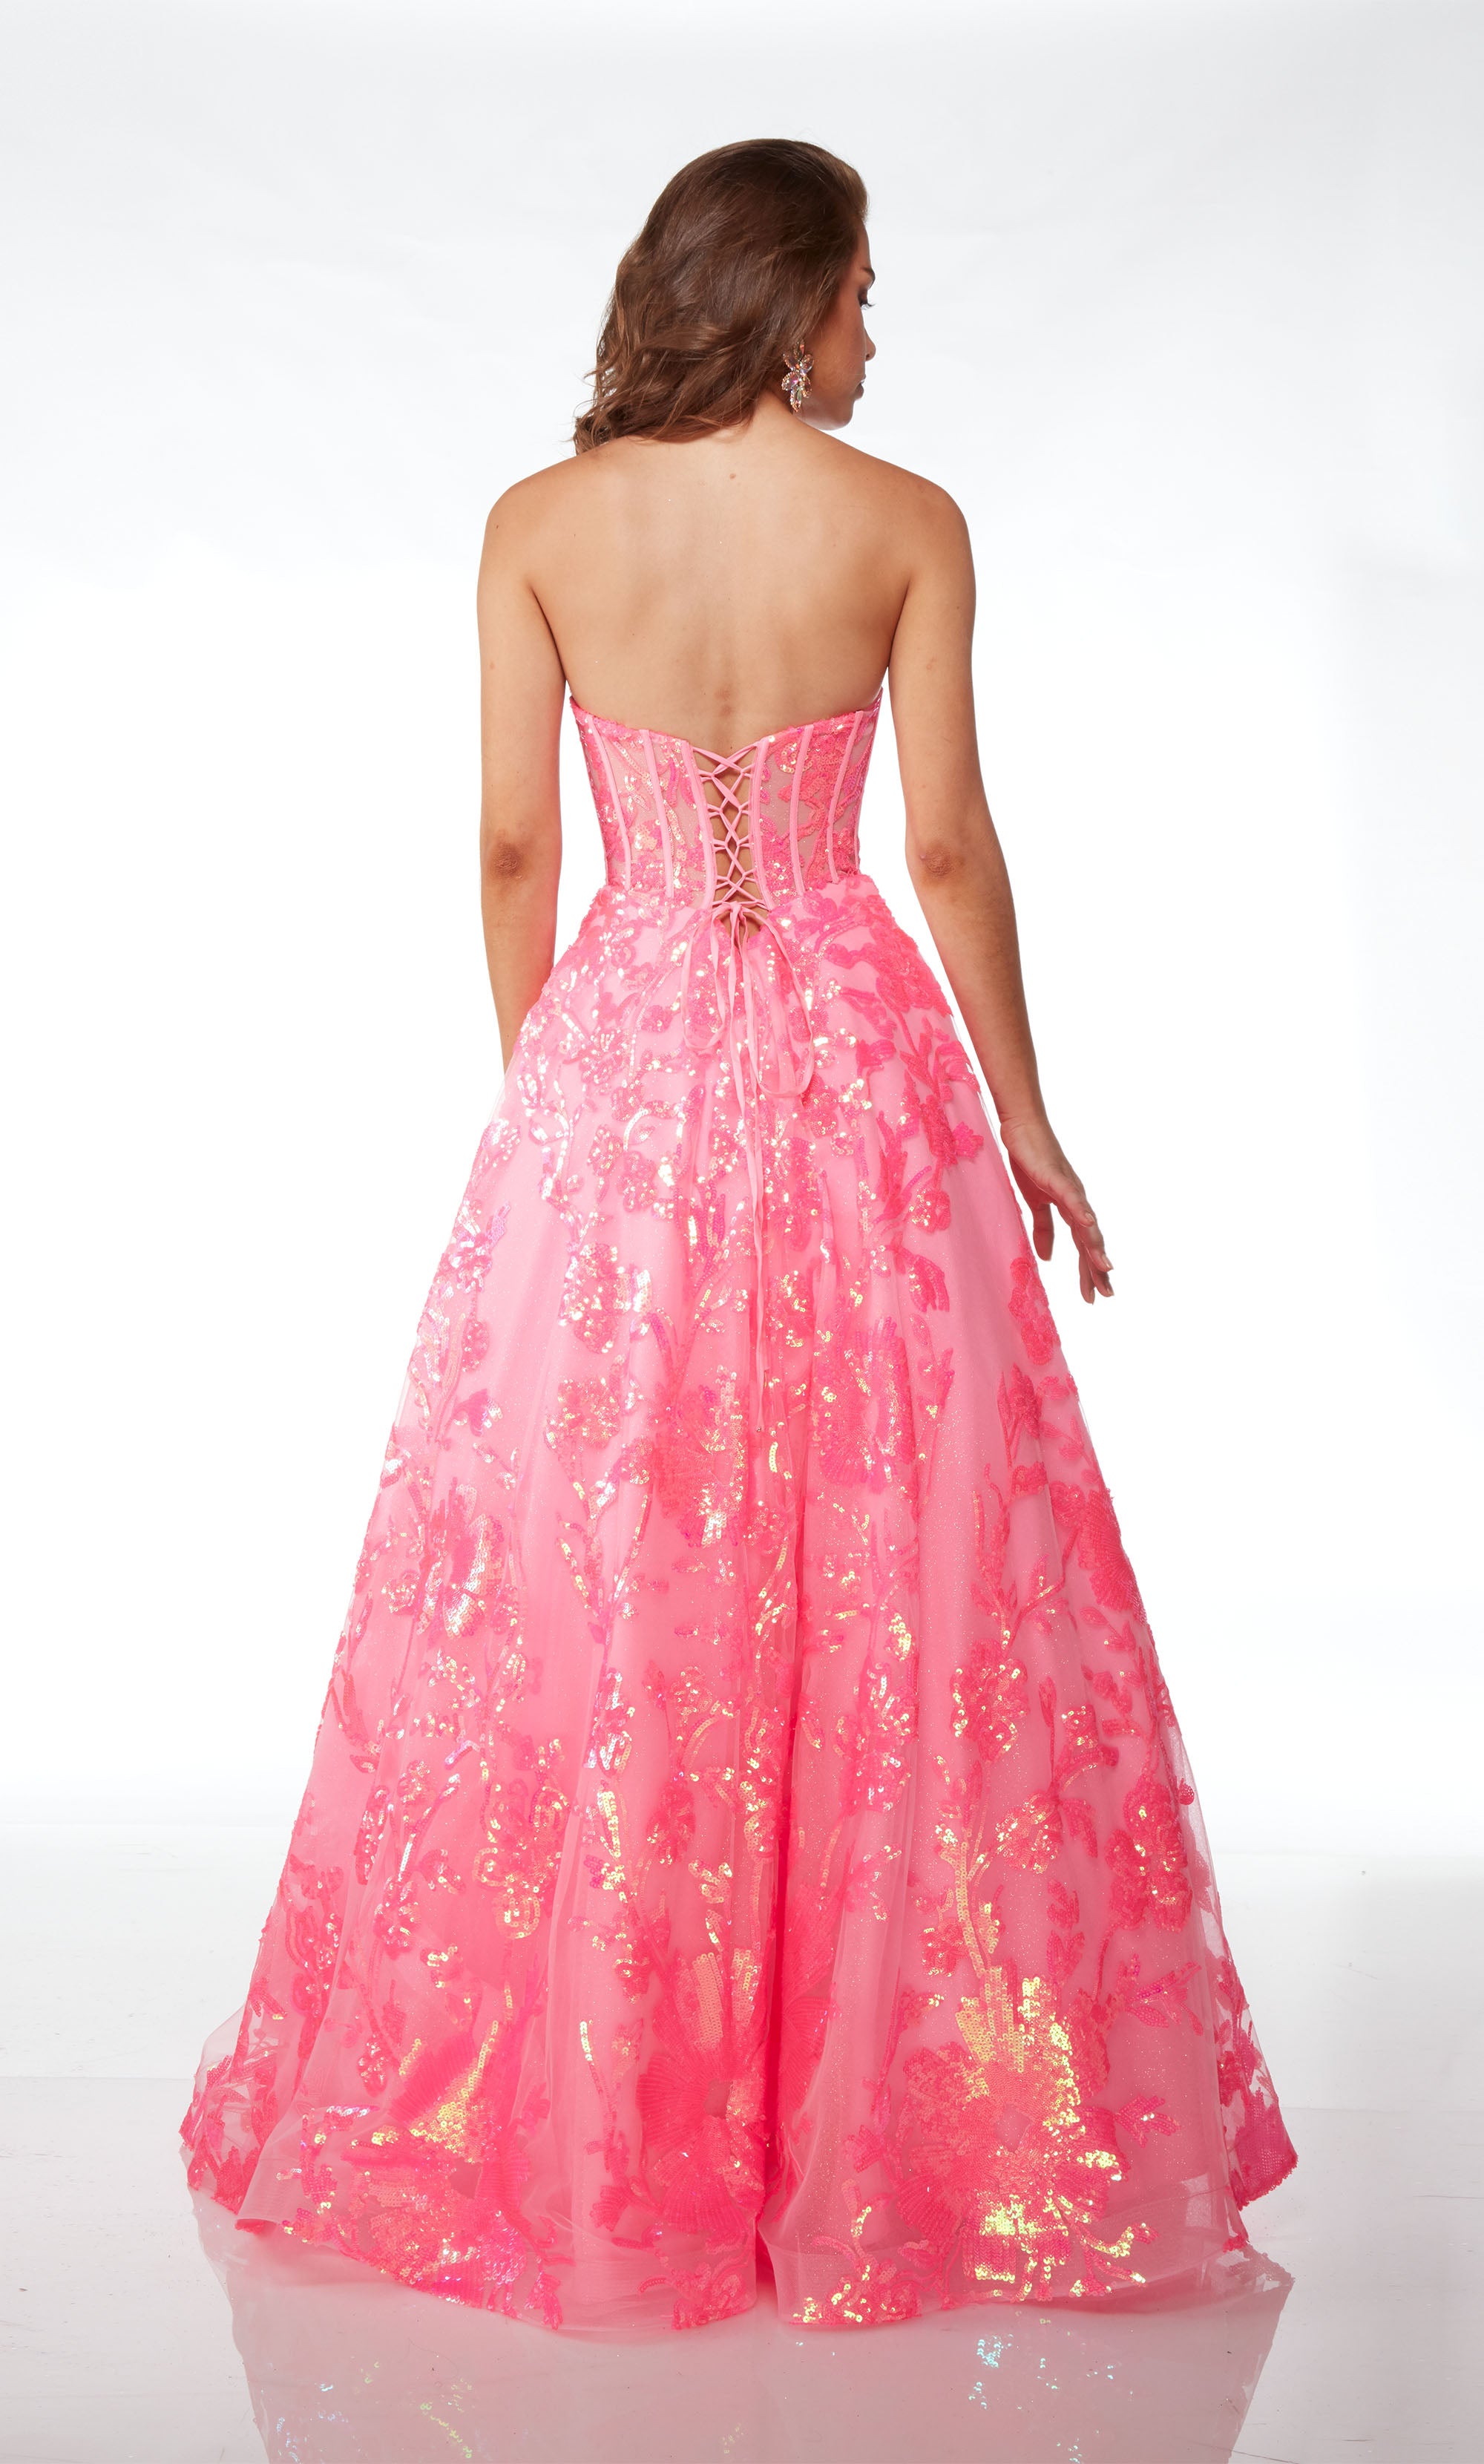 2024 Prom Dresses - Long & Short Gowns | Terry Costa